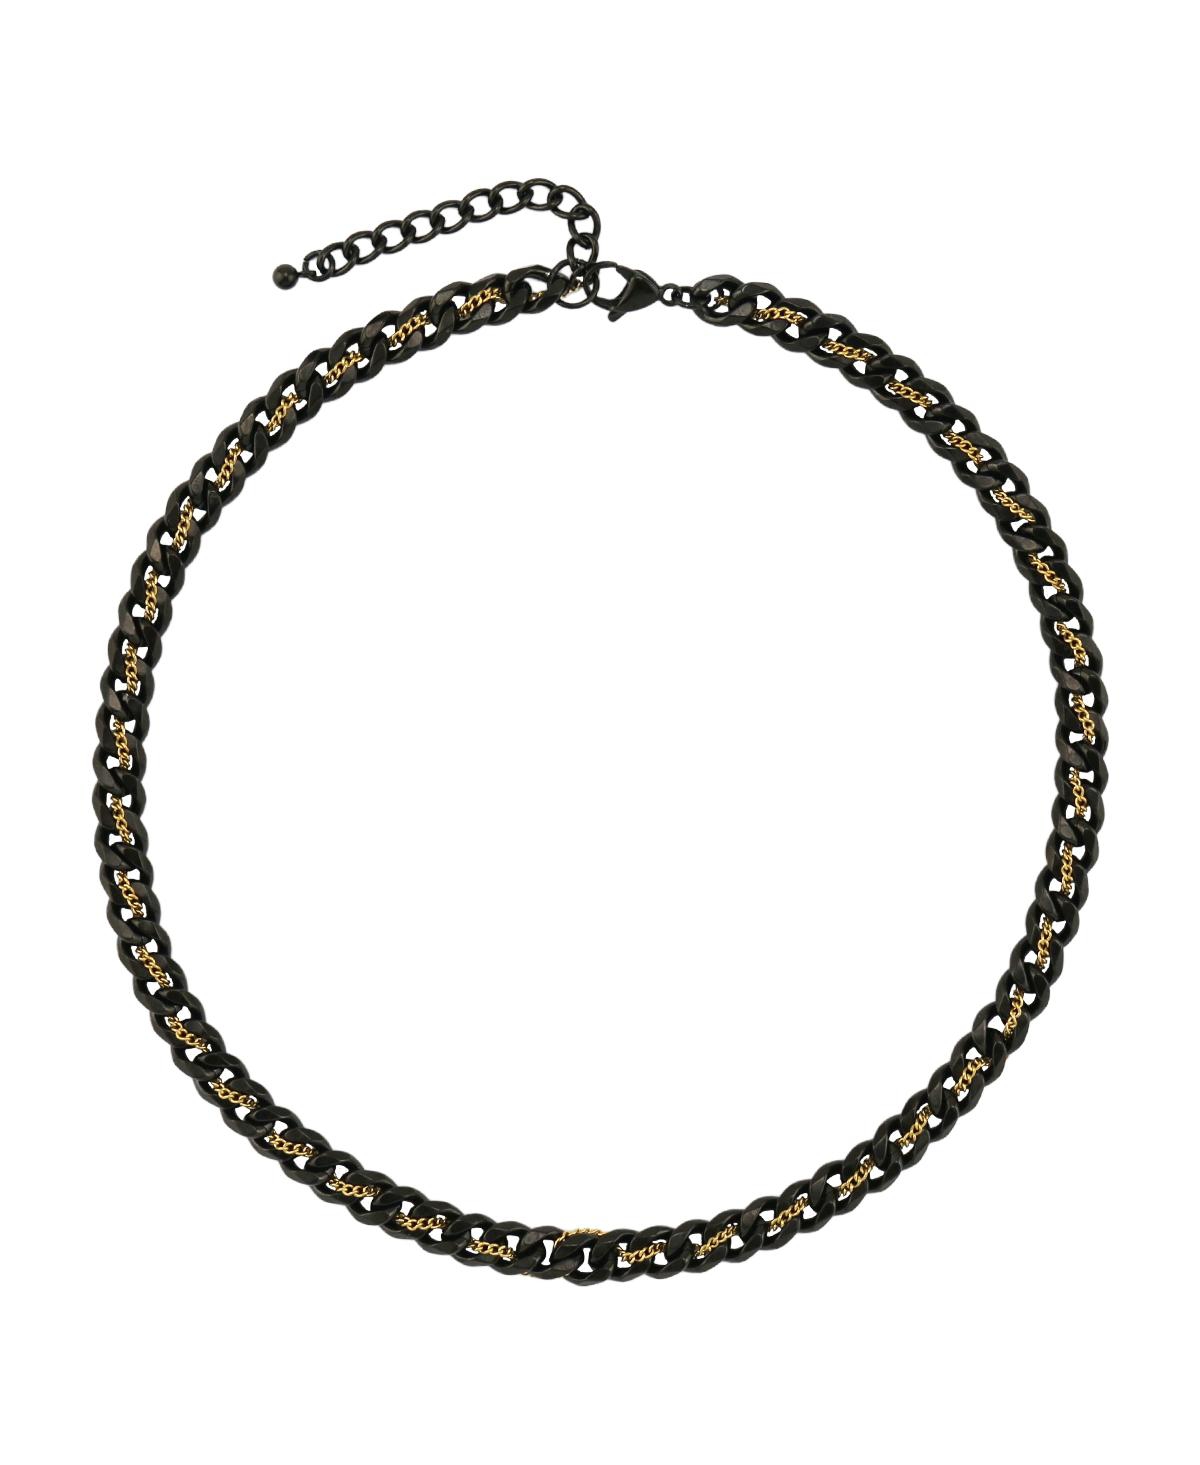 Nour Mixed Metal Chain Necklace - Two tone